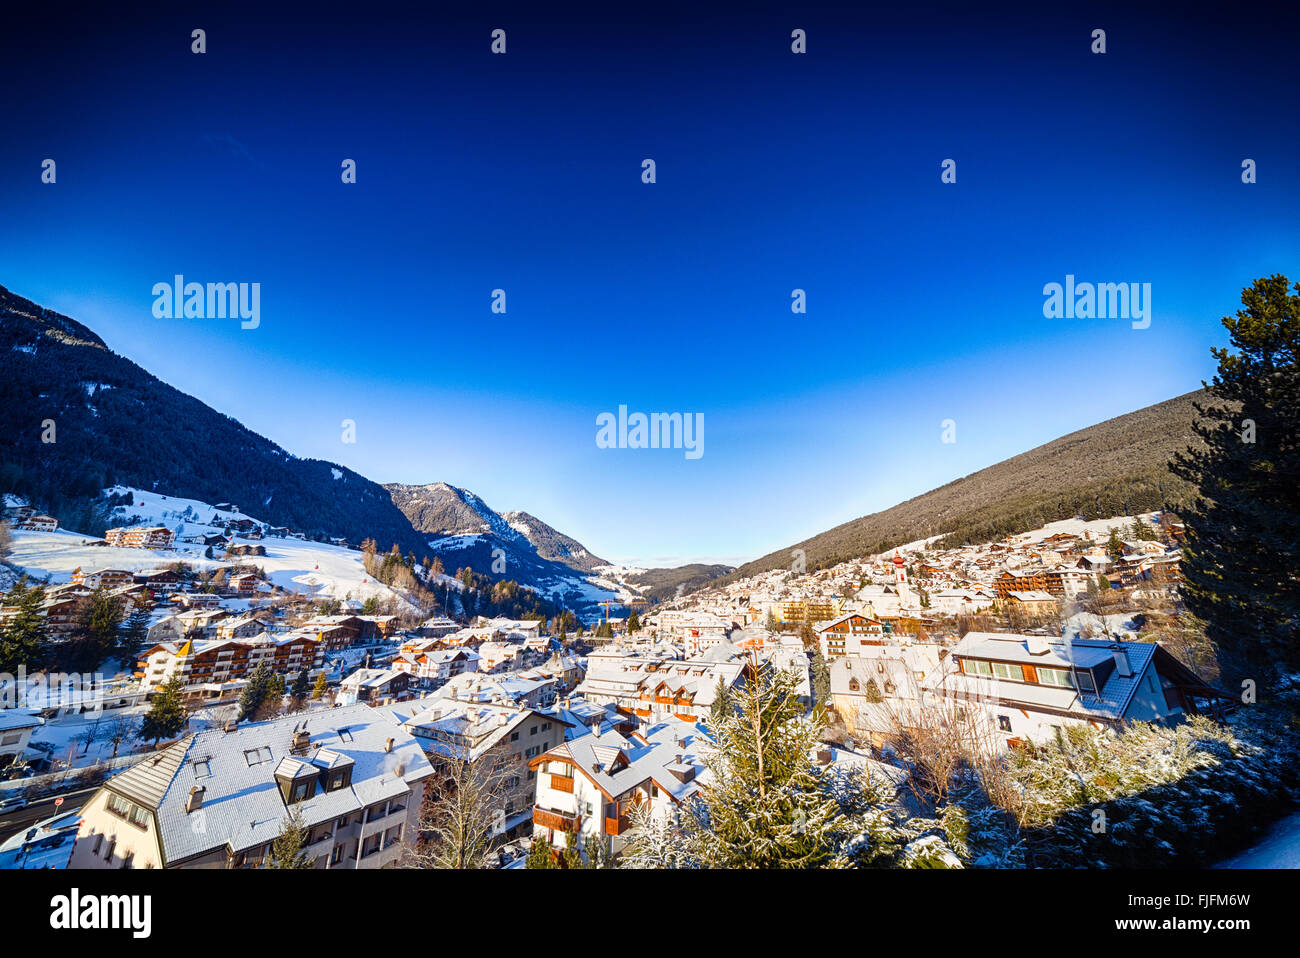 Dawn on snowy rooftops of a village nestled in the mountains Stock Photo